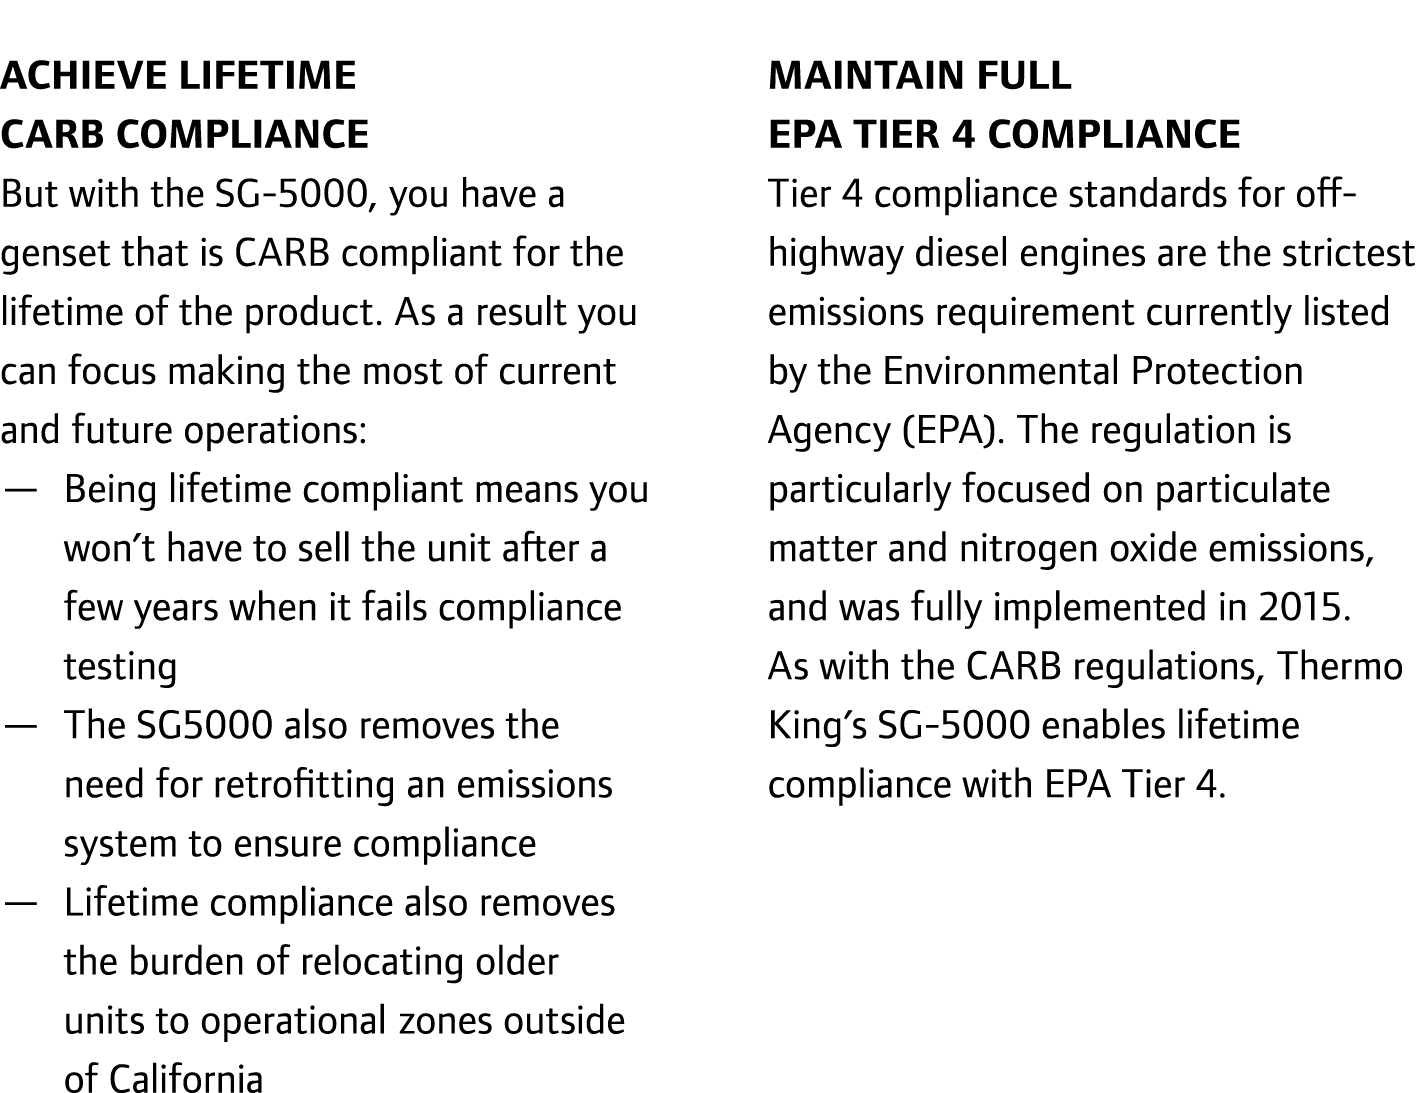 Achieve lifetime CARB compliance But with the SG-5000, you have a genset that is CARB compliant for the lifetime of t...